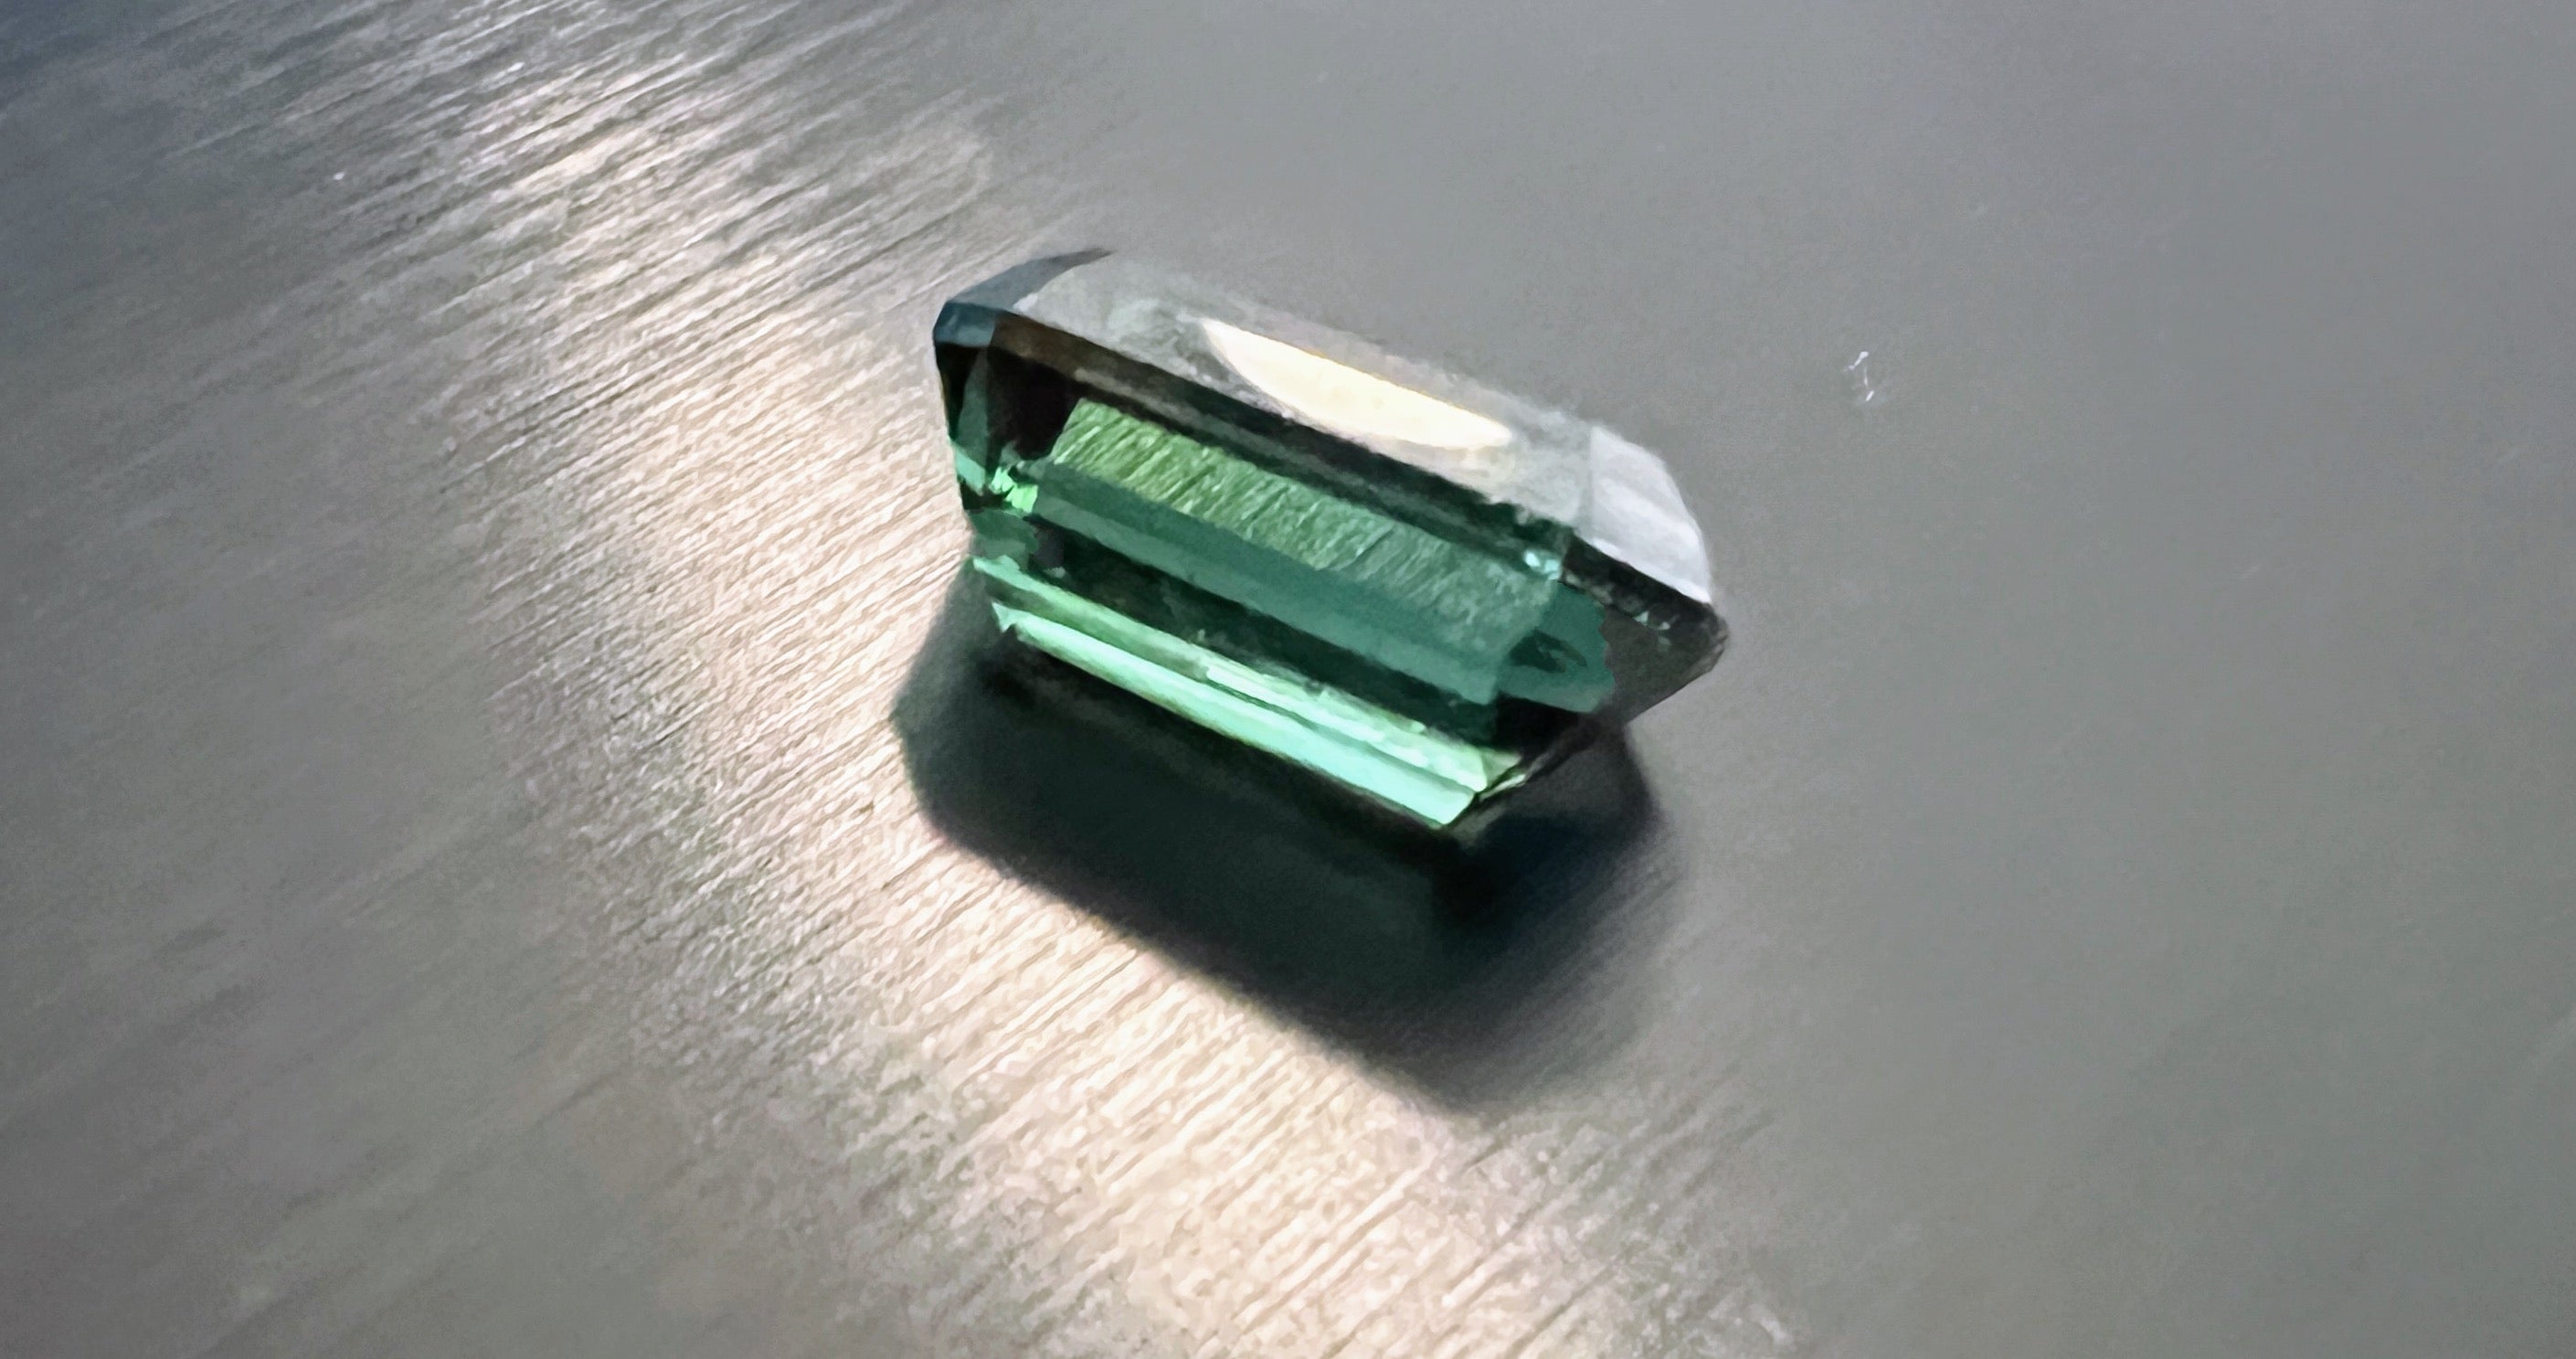 Enjoy the true beauty in this 5.41ct Deep Green Emerald Cut Tourmaline, a hidden gem waiting to grace your collection. At first glance, you might think you're gazing upon a natural emerald. This tourmaline boasts a lush, deep green hue with a